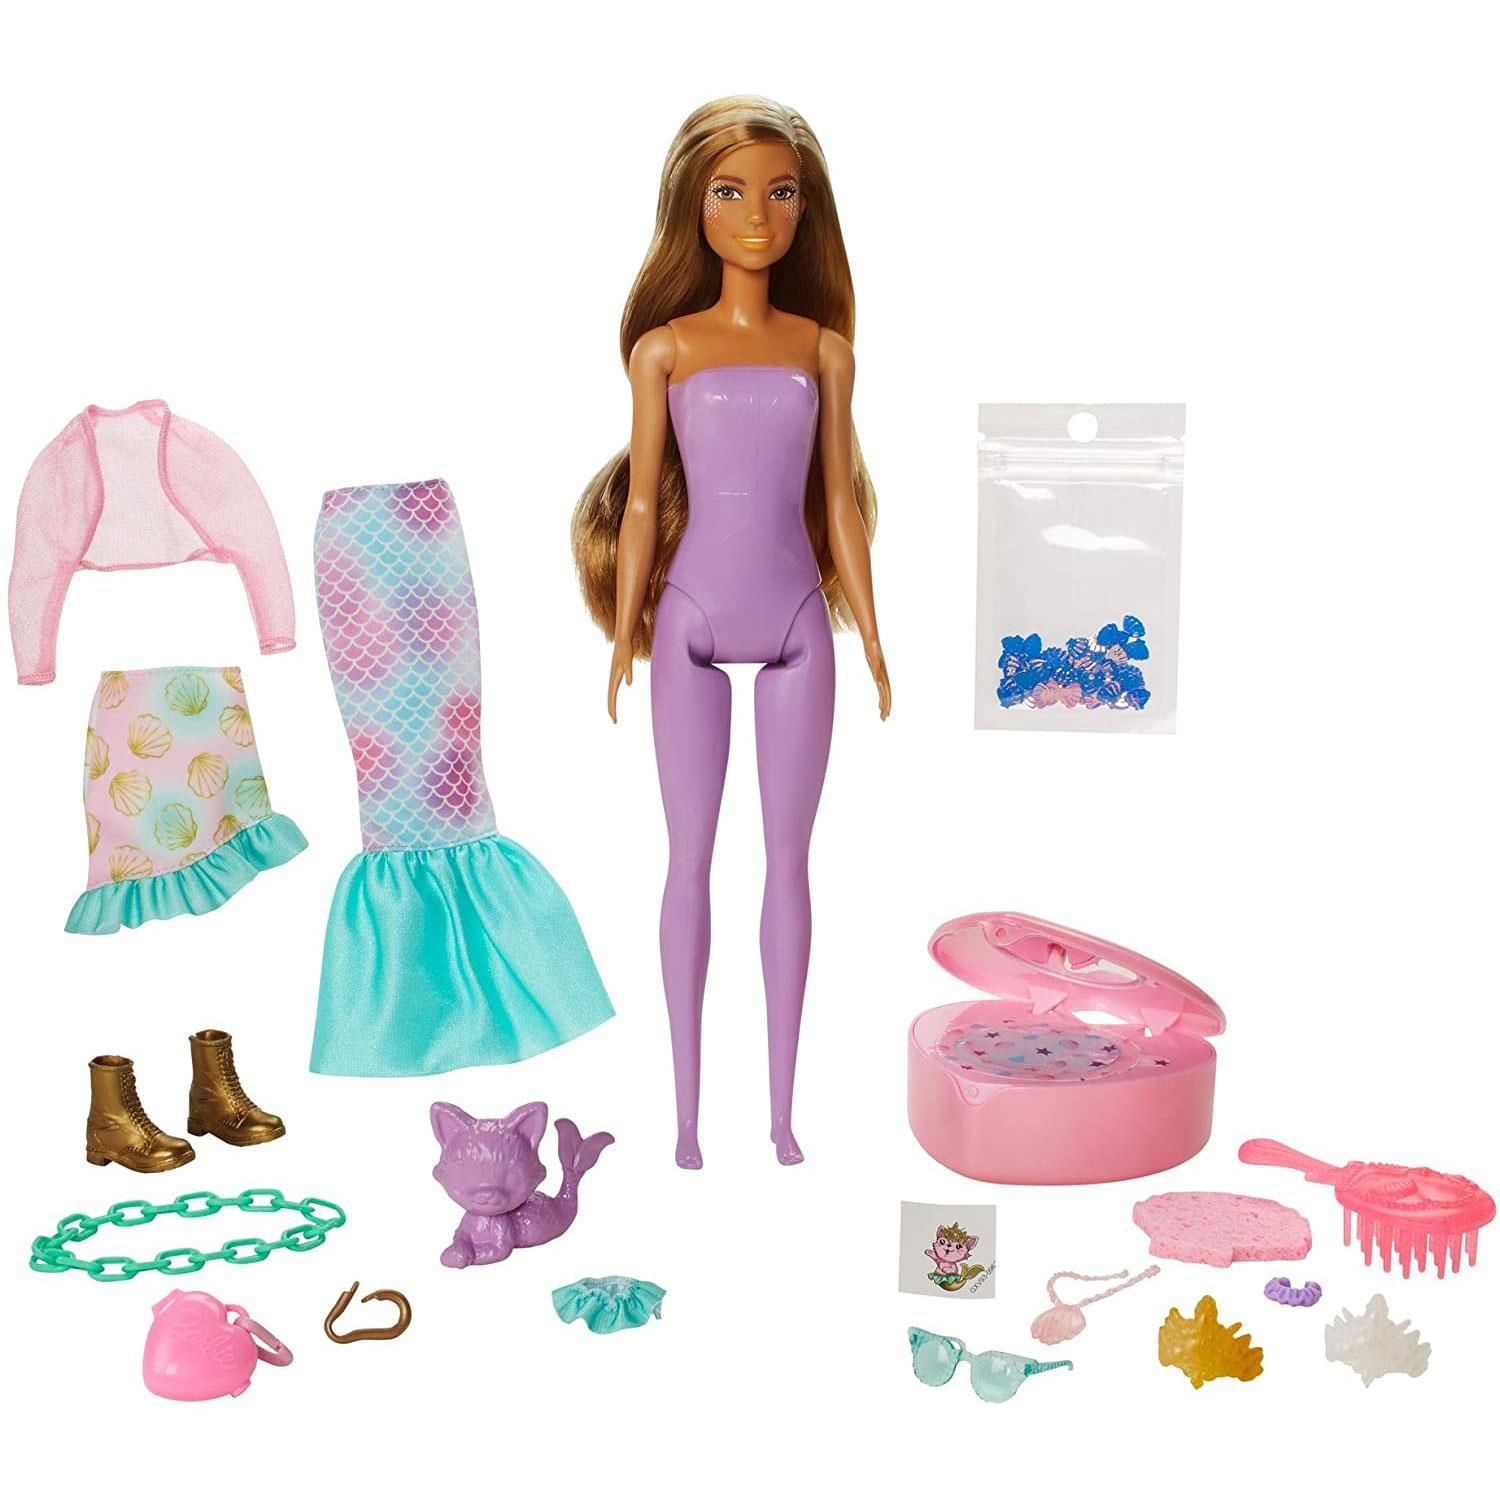 Barbie Colour Reveal dolls deliver the ultimate unboxing experience -- this set features 25 surprises, including 4 repeat color-change features, a 'mer-pet,' two fantasy fashion mermaid outfits, glitter and slime in a heart-shaped compact, a Barbie doll, a child-sized charm bracelet with two charms and a sticker! Play out fantasy fashion transformations over and over again. The packaging is part of the fun, too -- remove the 16 mystery bags through the peel-able front panels. One of the surprise bags contains a mystery Colour Reveal doll partially covered in the purple peelable coating. Kids peel to reveal the doll, then open the surprise bags to discover clothes and accessories for two complete mermaid-inspired looks! And the surprises continue peel to reveal the 'mer-pet,' too! Dip the seashell-shaped sponge in ice-cold water to activate the color-change features -- like on the doll's face, bodice and hair! Color change on the pet's face adds to the surprise fun! With the use of warm and ice-cold water, kids can repeat the wow color-change moments over and over again! With so many surprises and pieces, kids will have so many stories to tell. Which doll will you reveal? Kids can collect them to mix and match accessories and expand the storytelling possibilities! Each is sold separately, subject to availability. Doll cannot stand alone. Colors and decorations may vary.